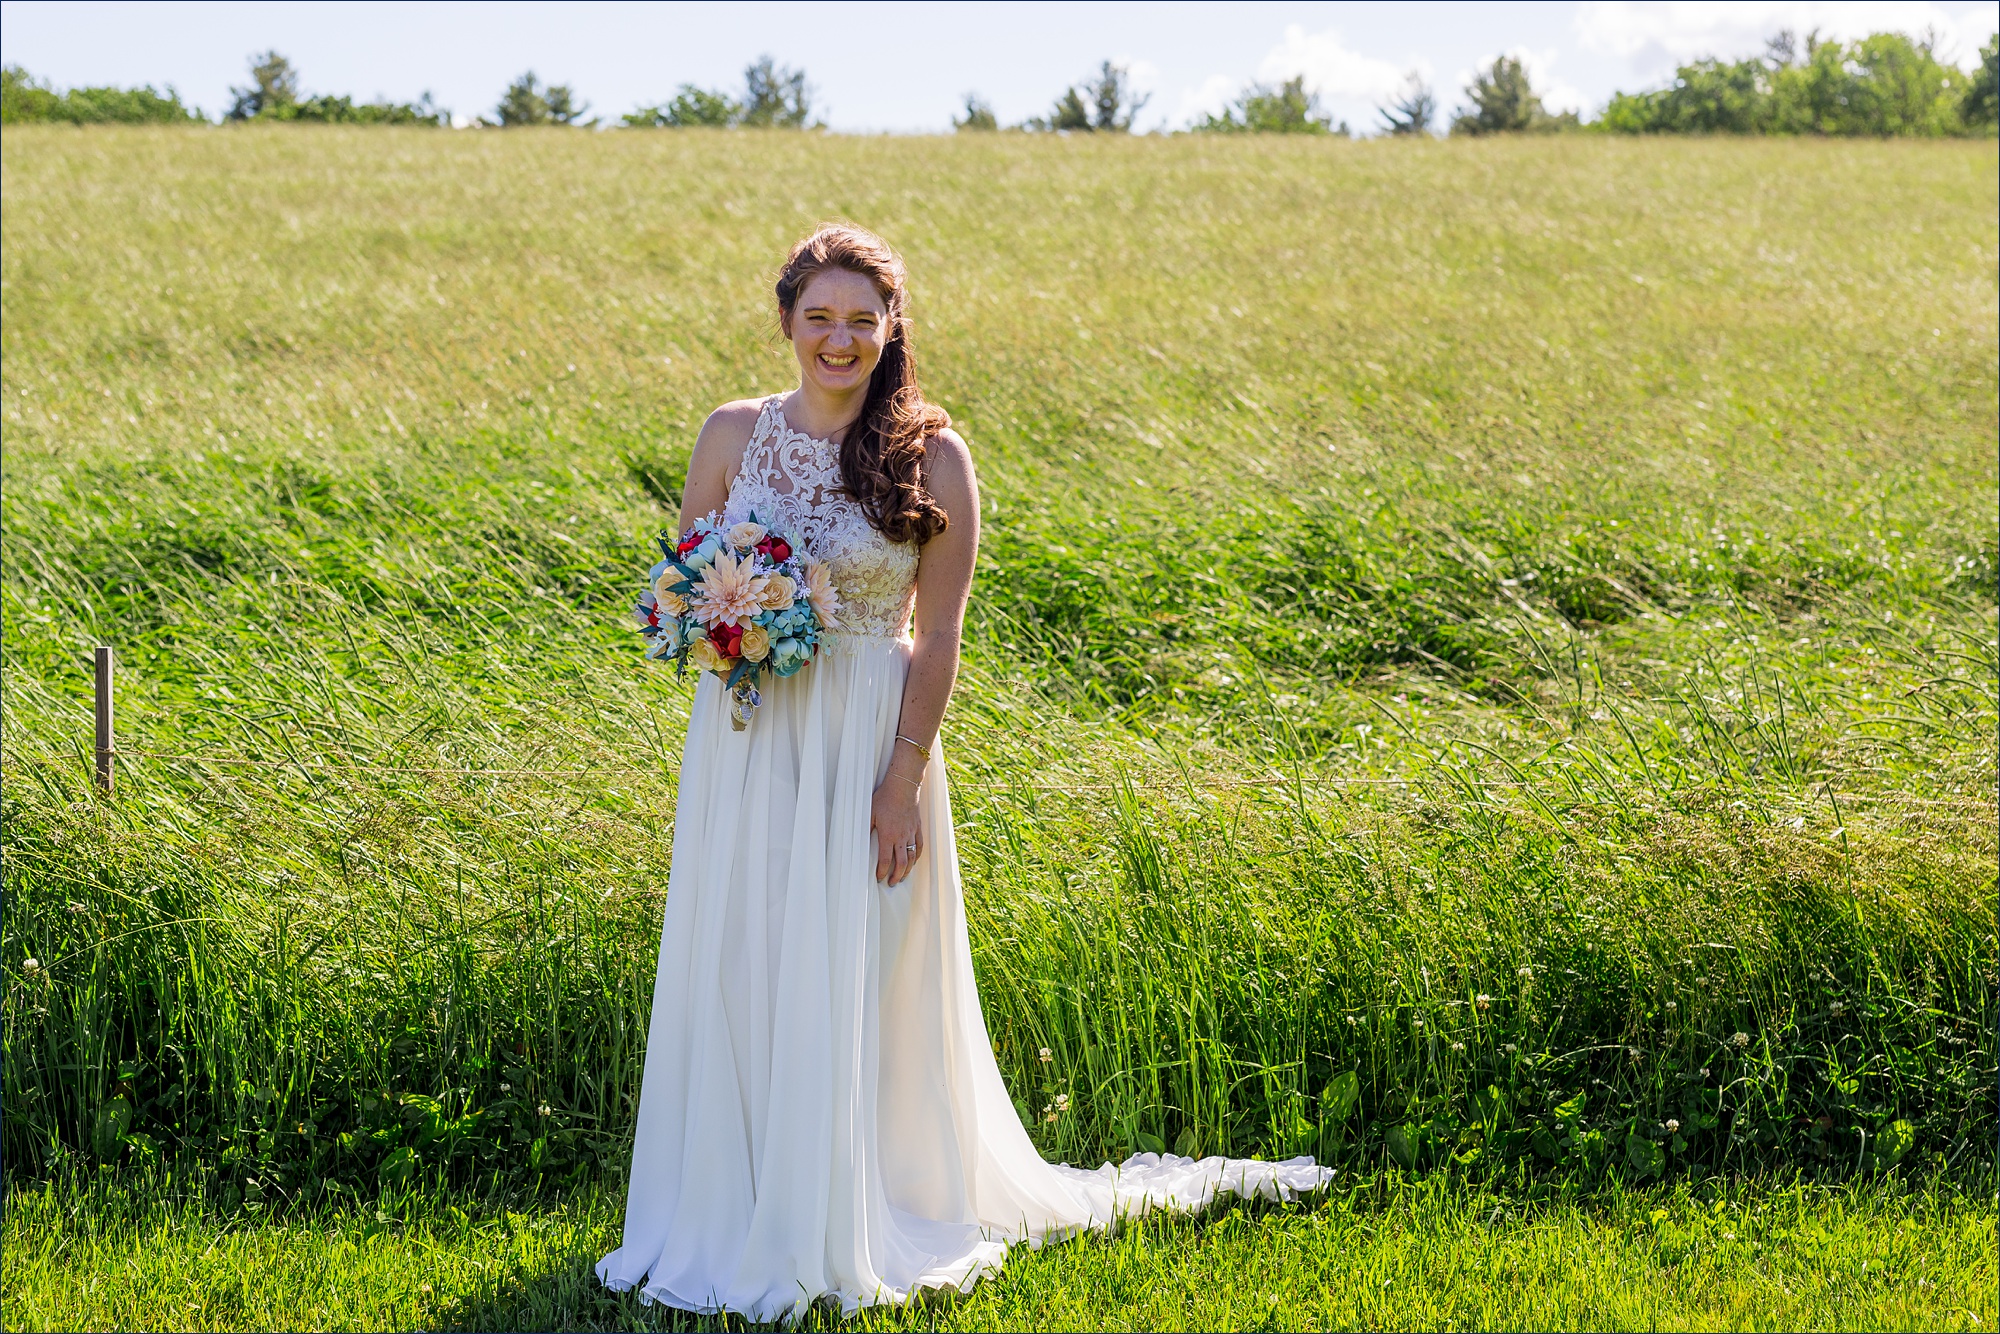 The beautiful bride smiles big in front of the waving tall grass in NH